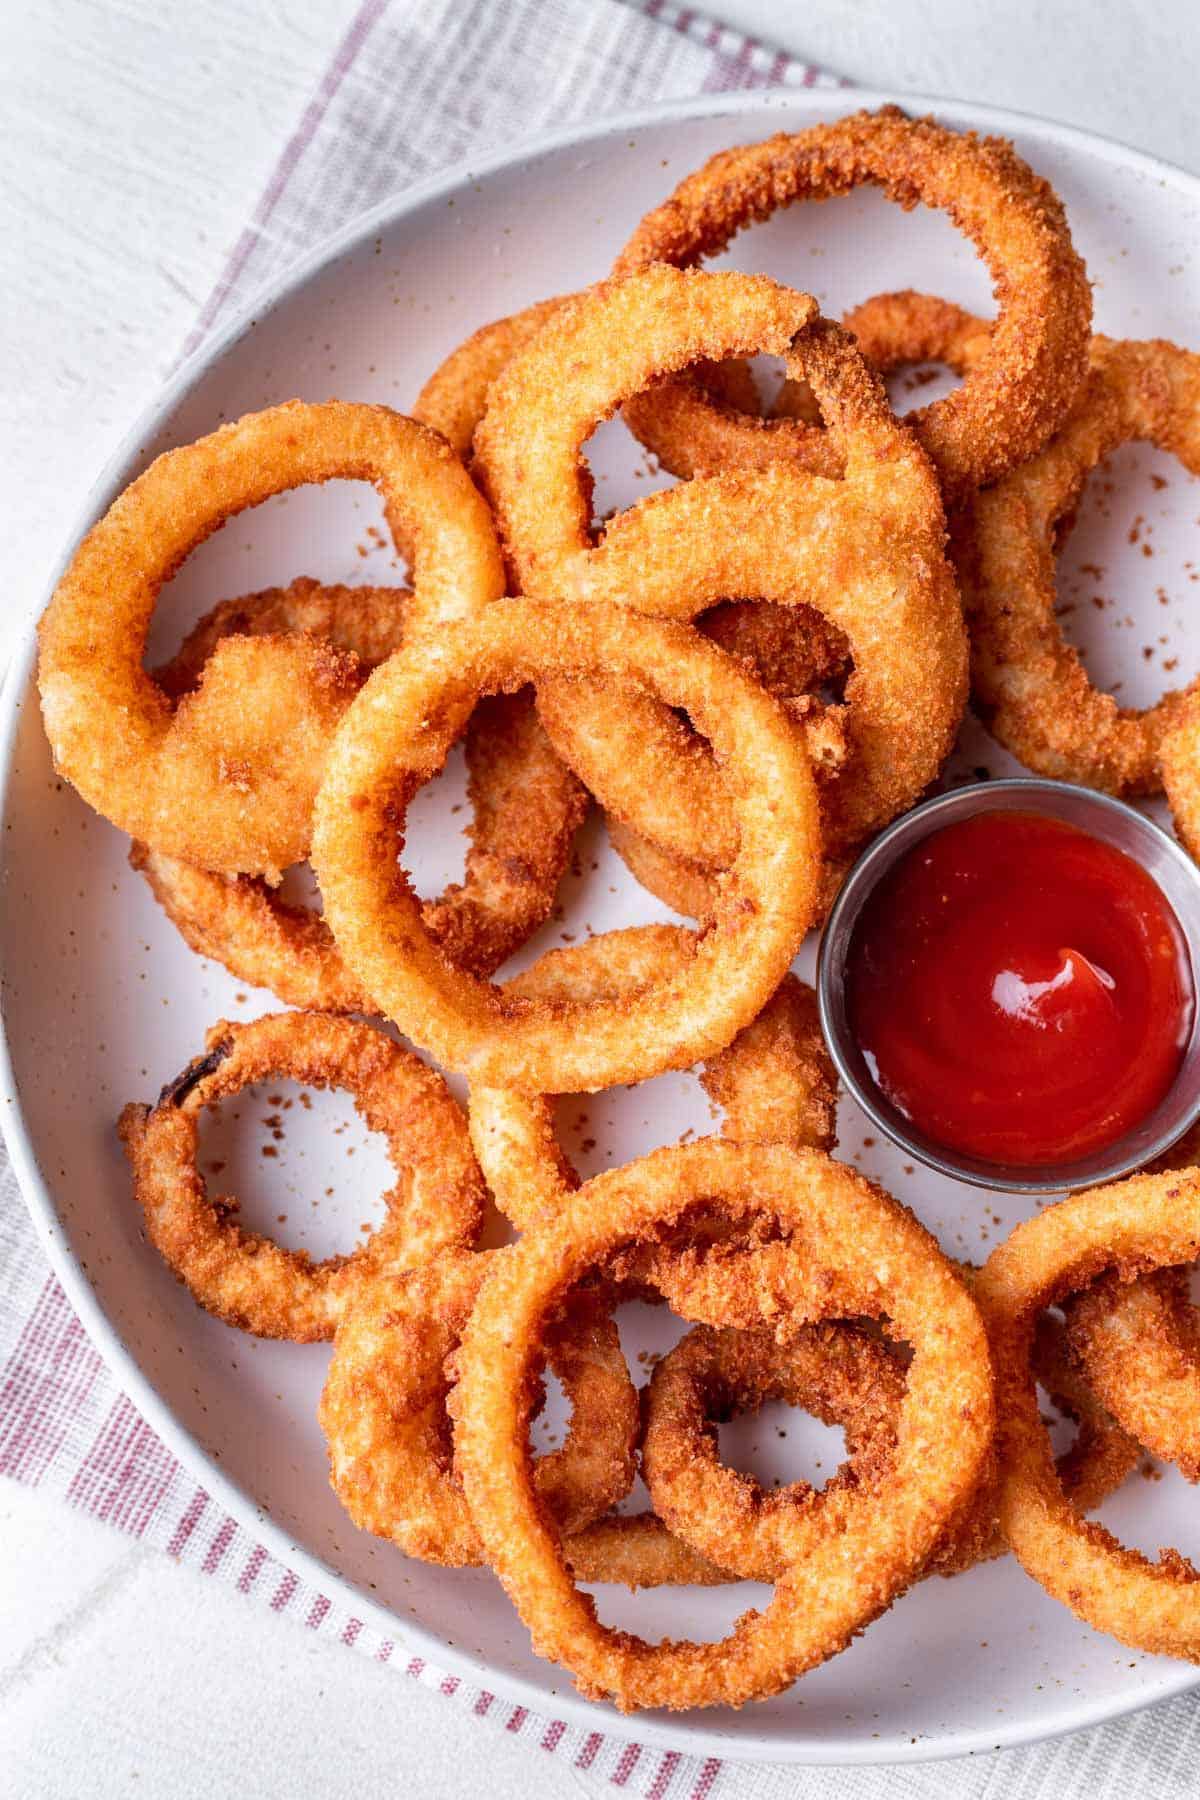 Onion rings on serving plate with side of ketchup..